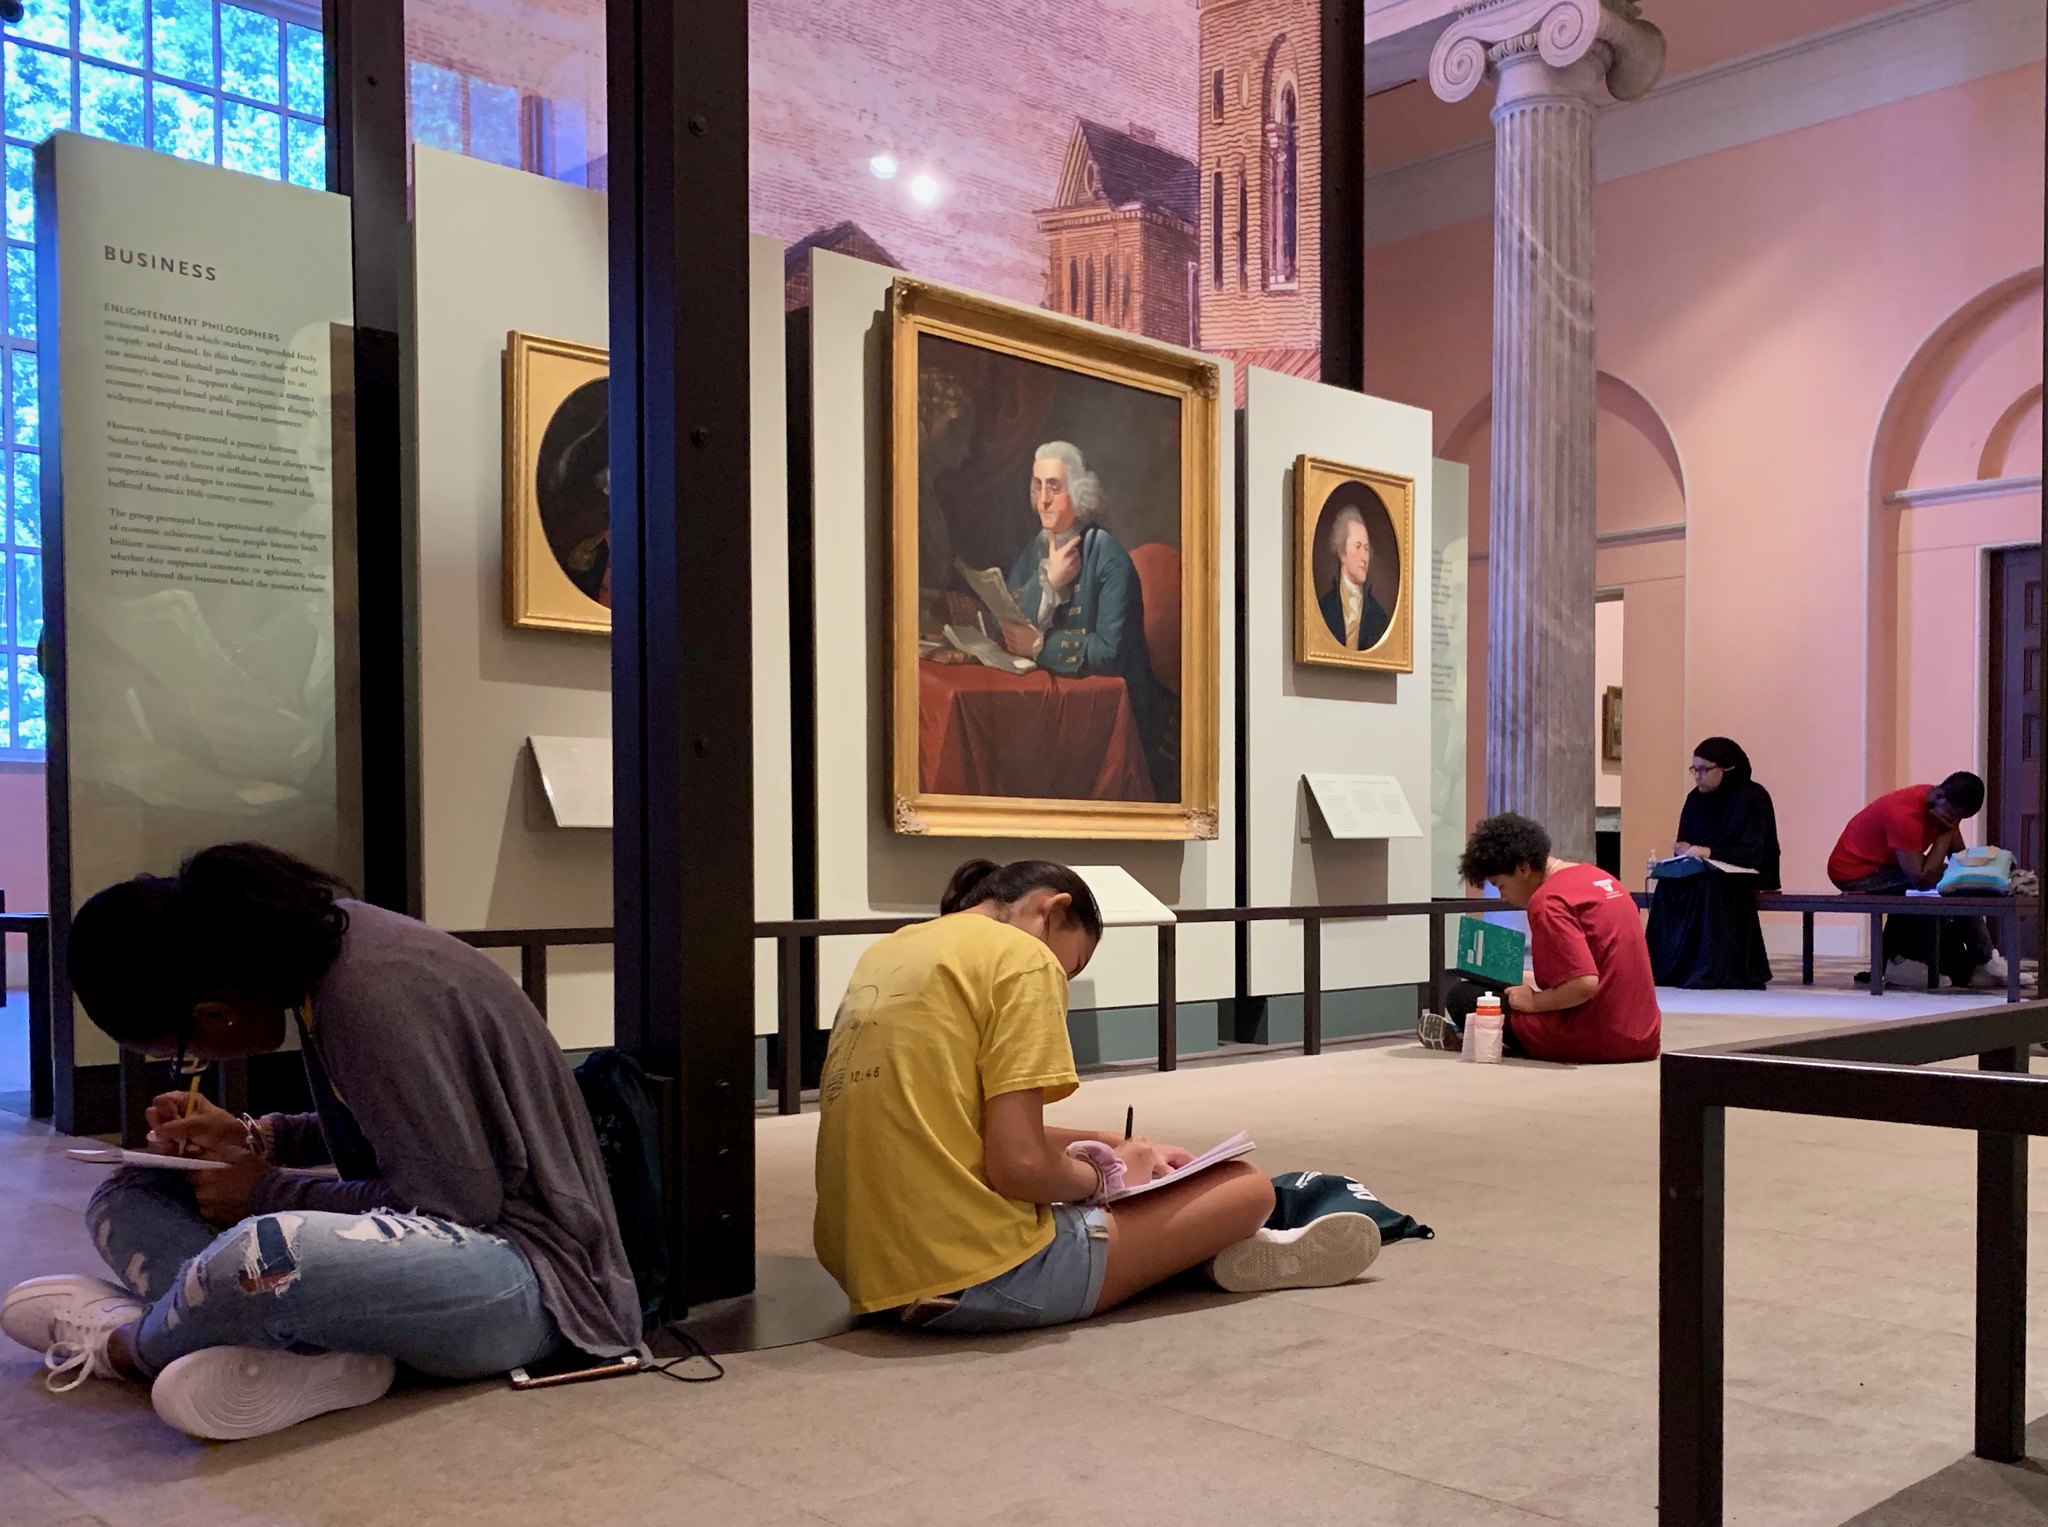 Students seated on ground write in notebooks in a museum